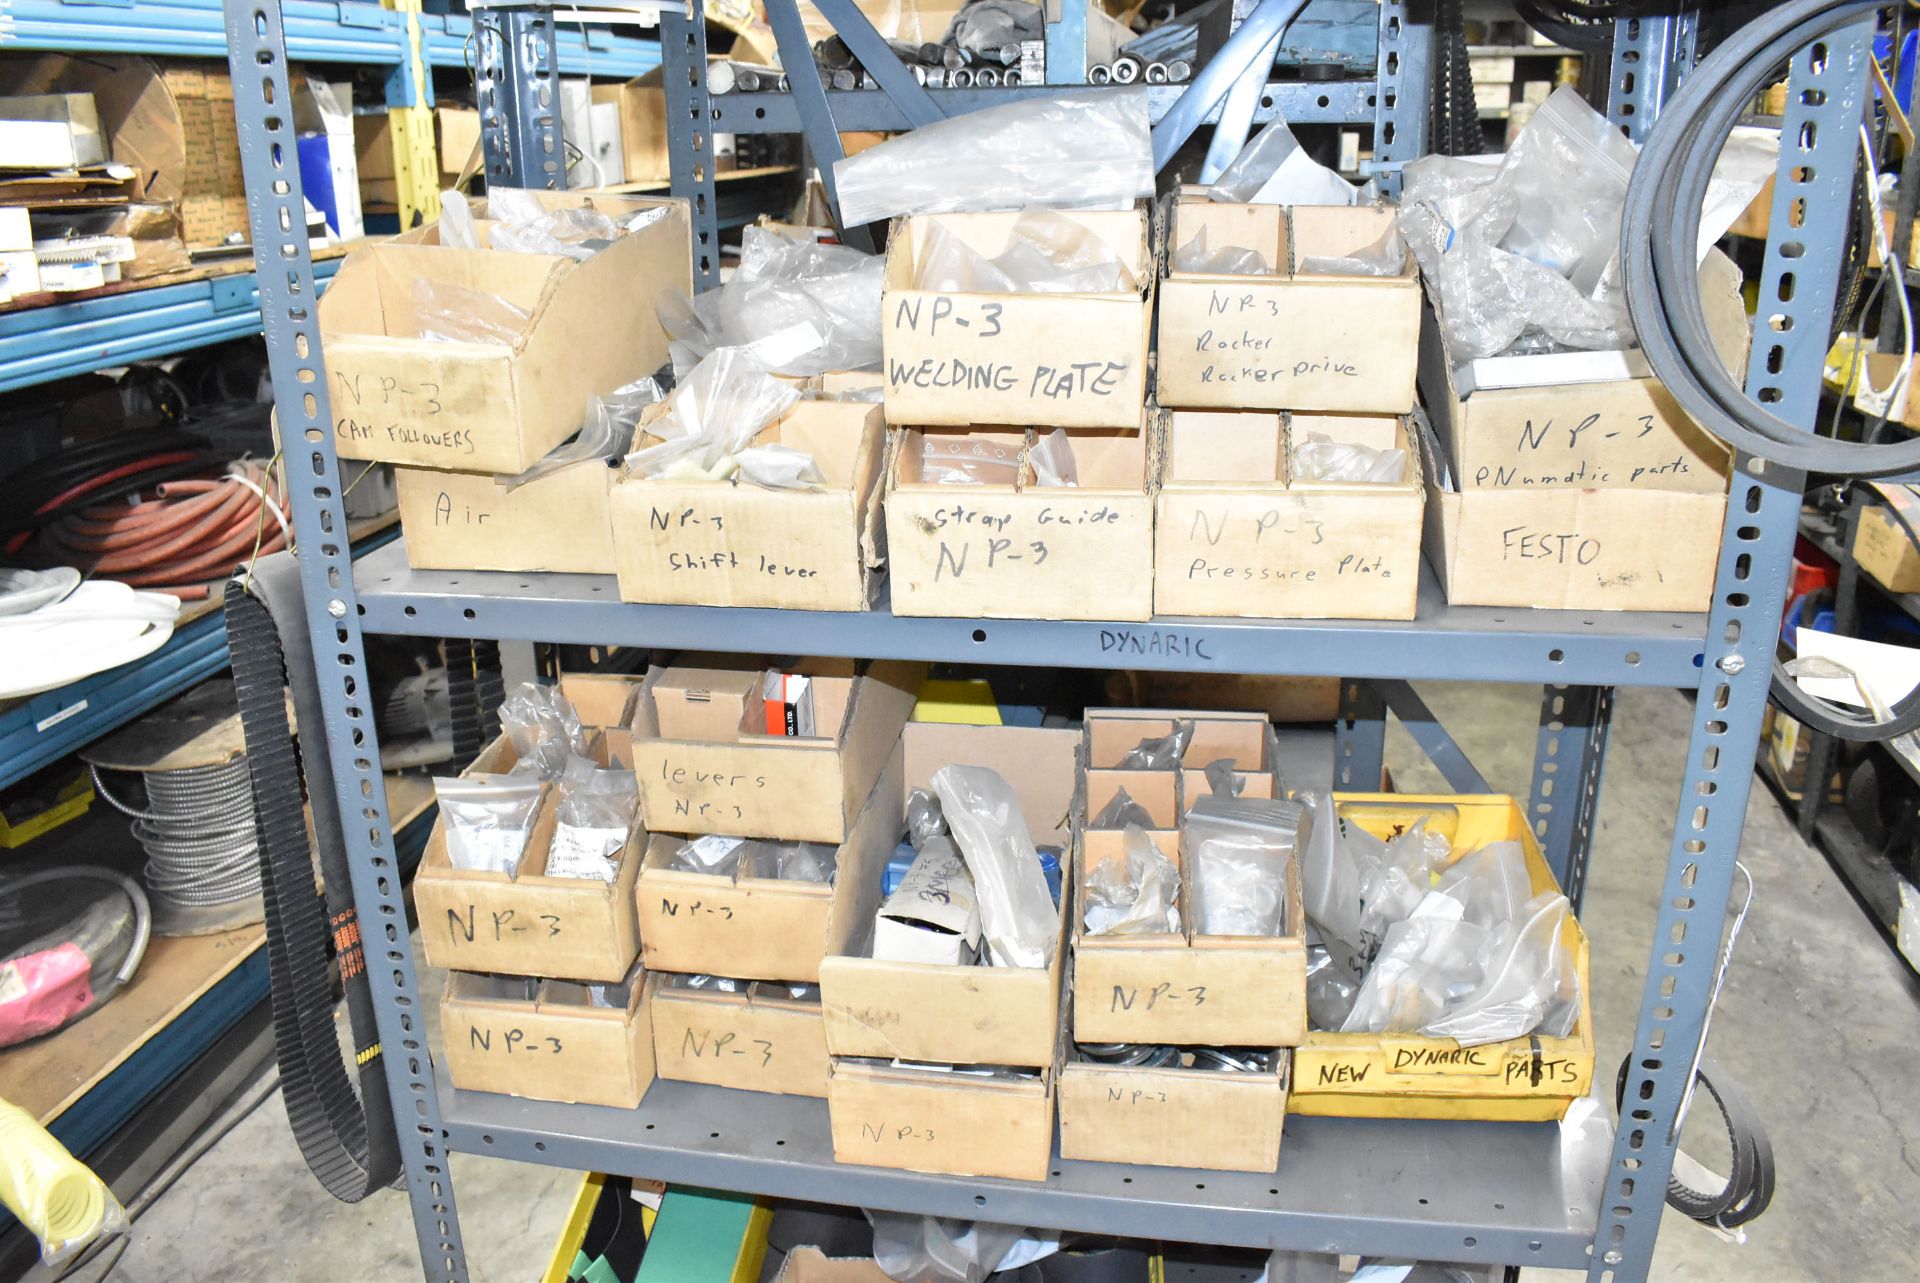 LOT/ (6) SECTIONS OF STEEL SHELVING WITH CONTENTS - INCLUDING NP-3 SPARE PARTS, DYNARIC SPARE PARTS, - Image 5 of 46